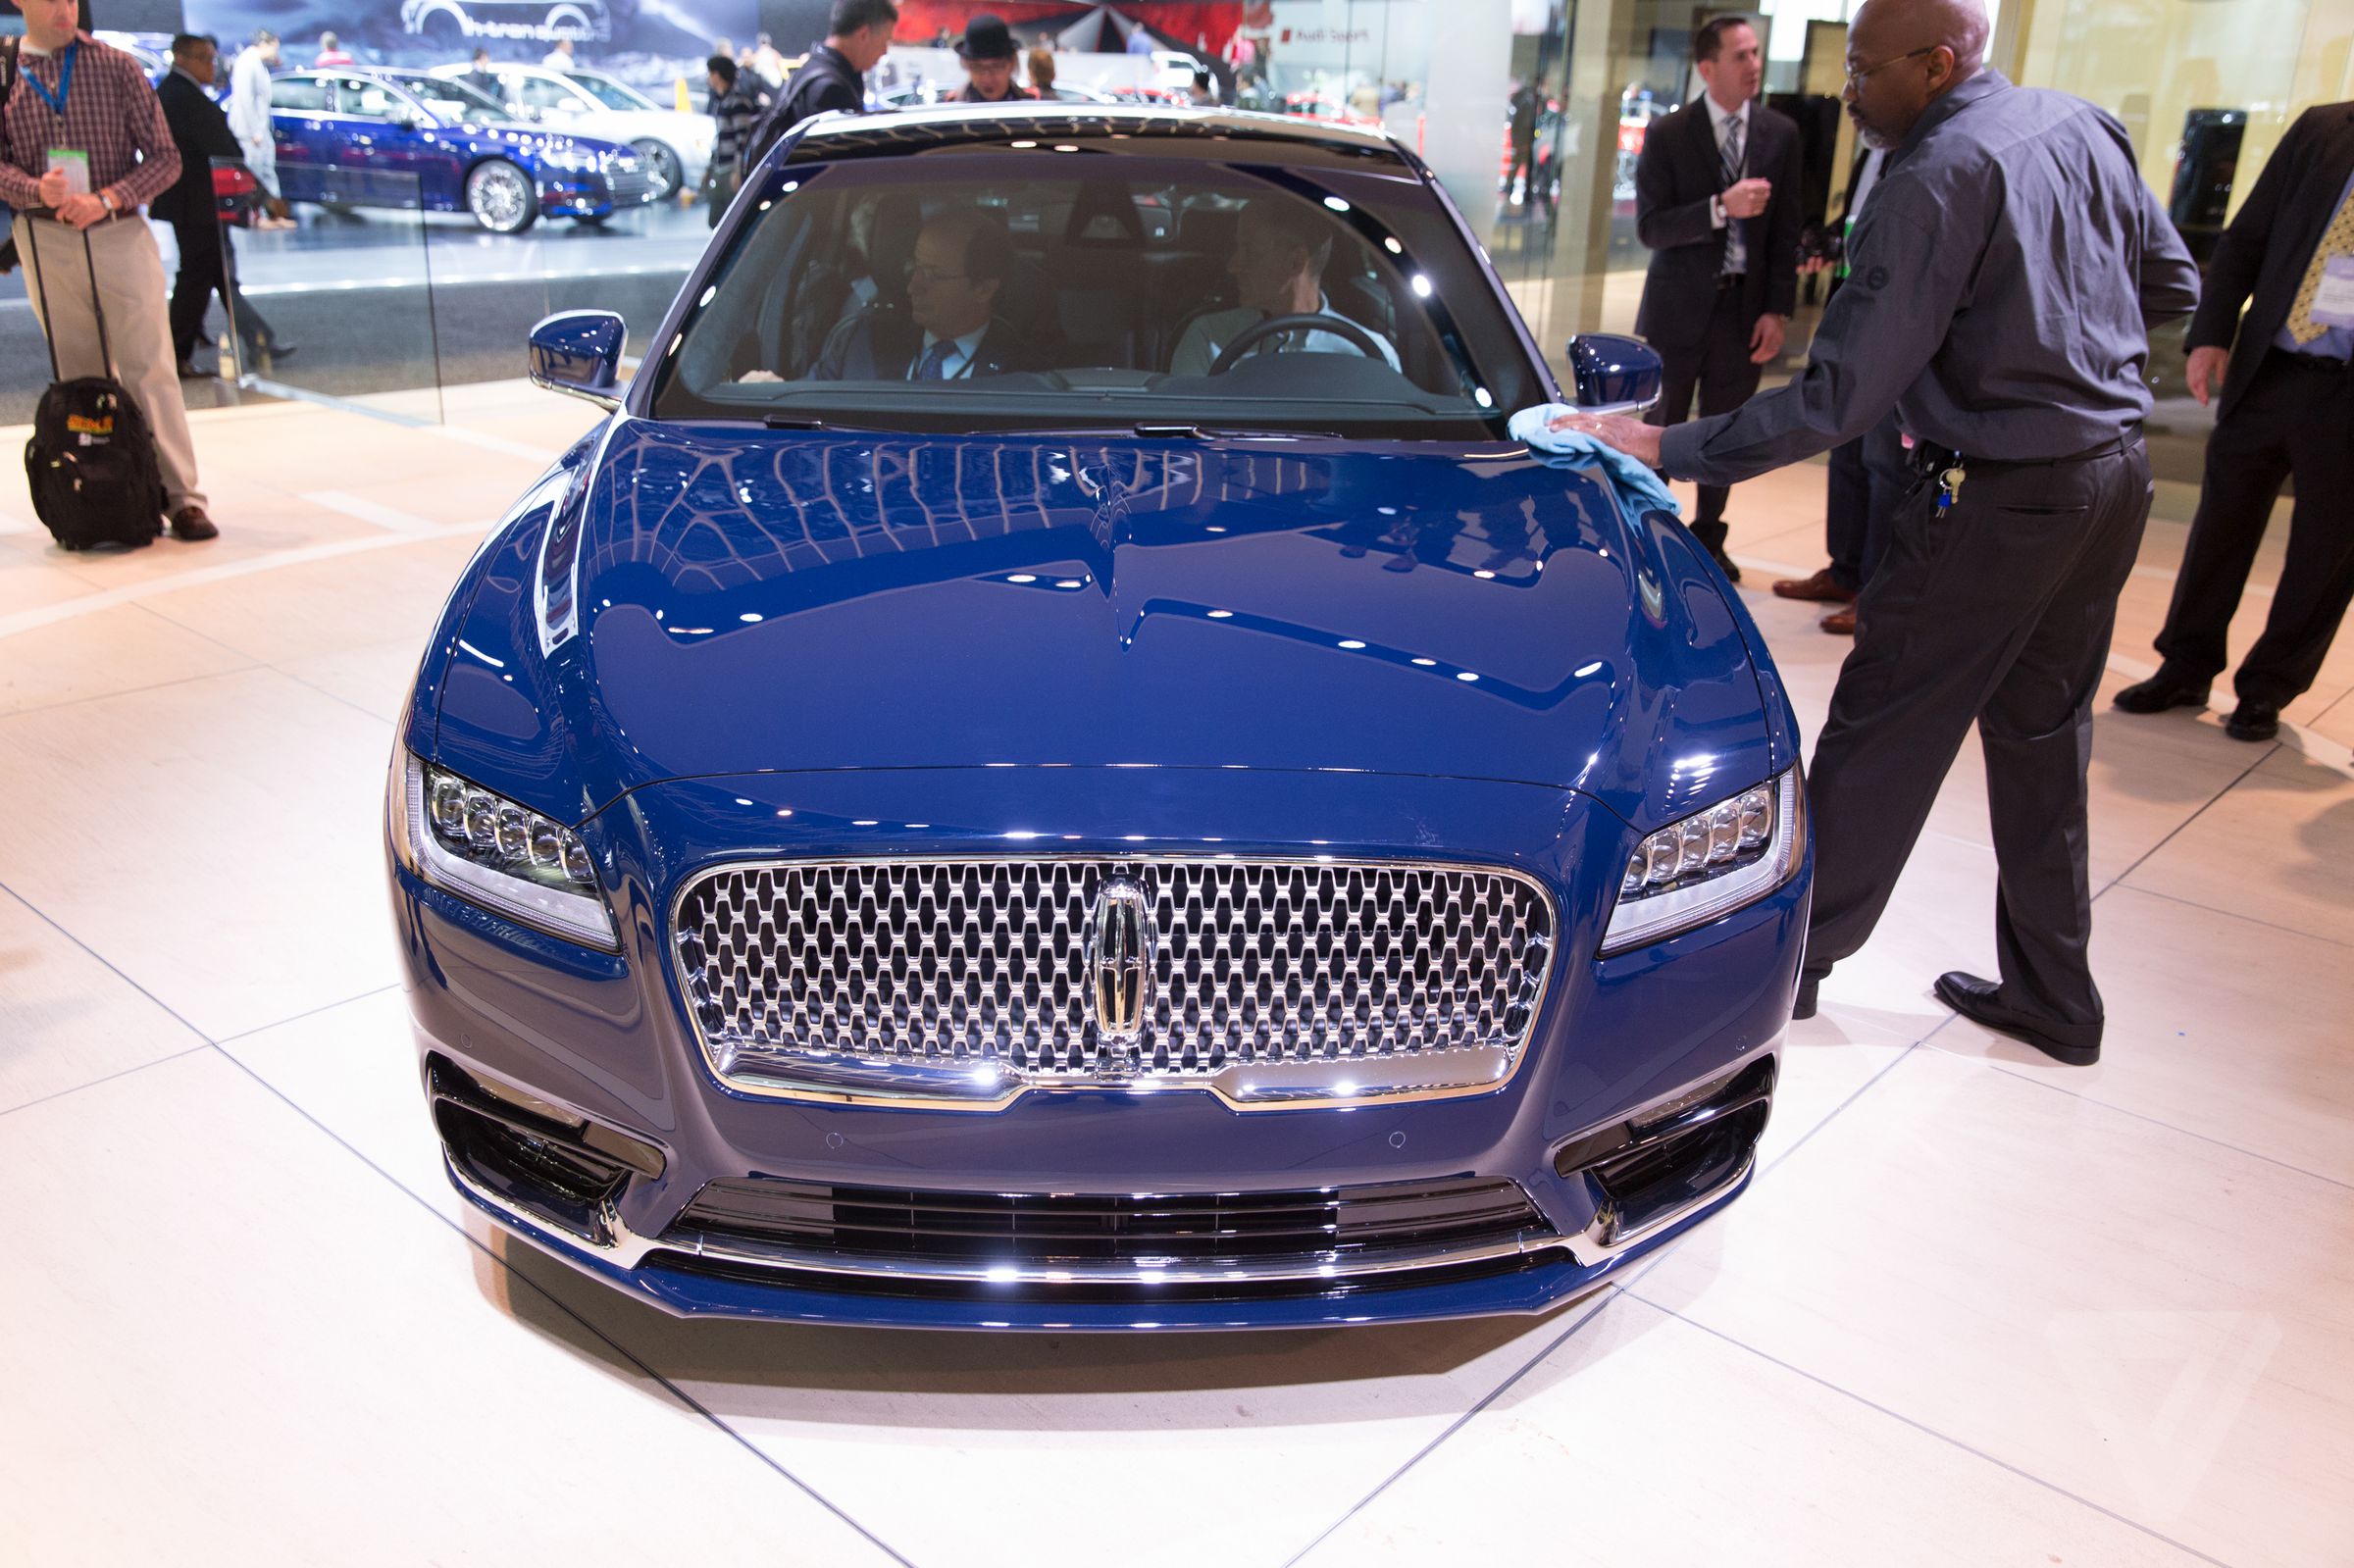 Lincoln Continental at the Detroit Auto Show